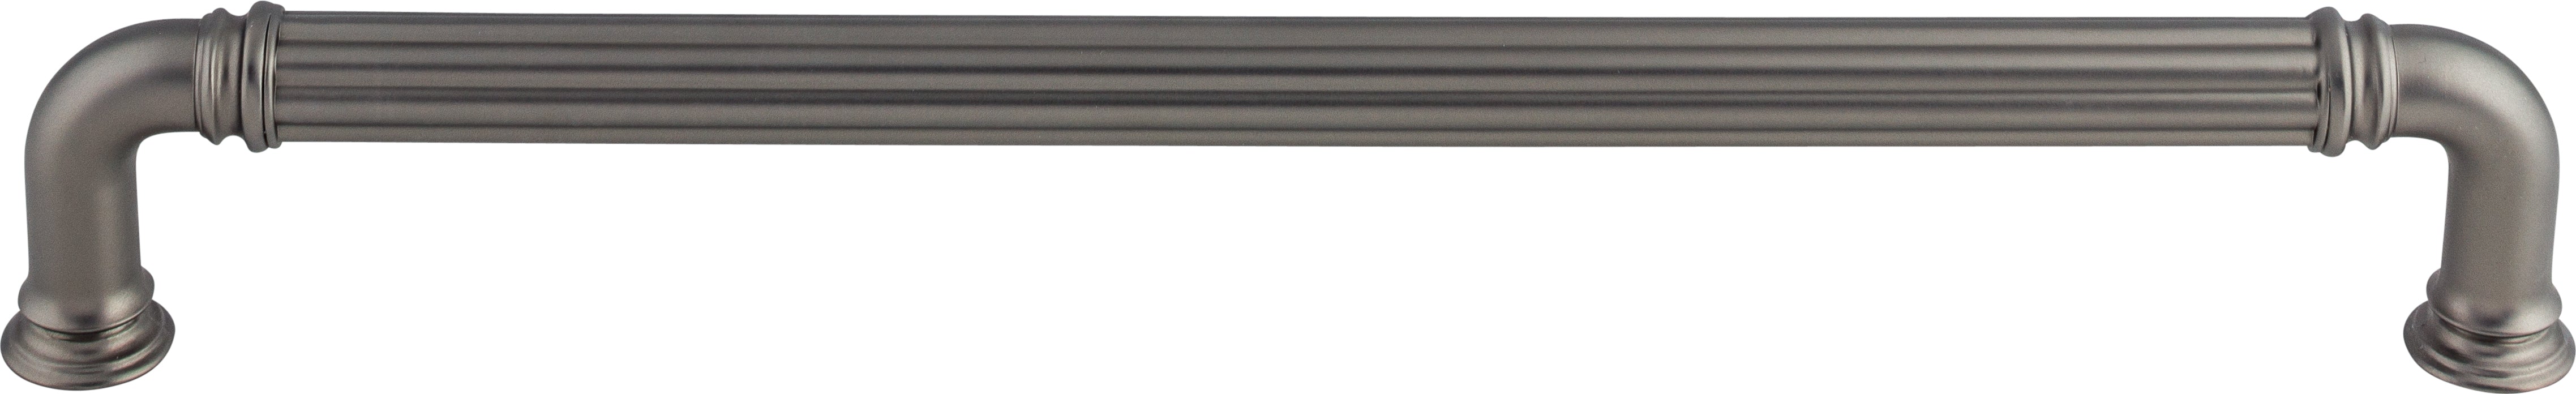 Reeded Appliance Pull 12 Inch (c-c)